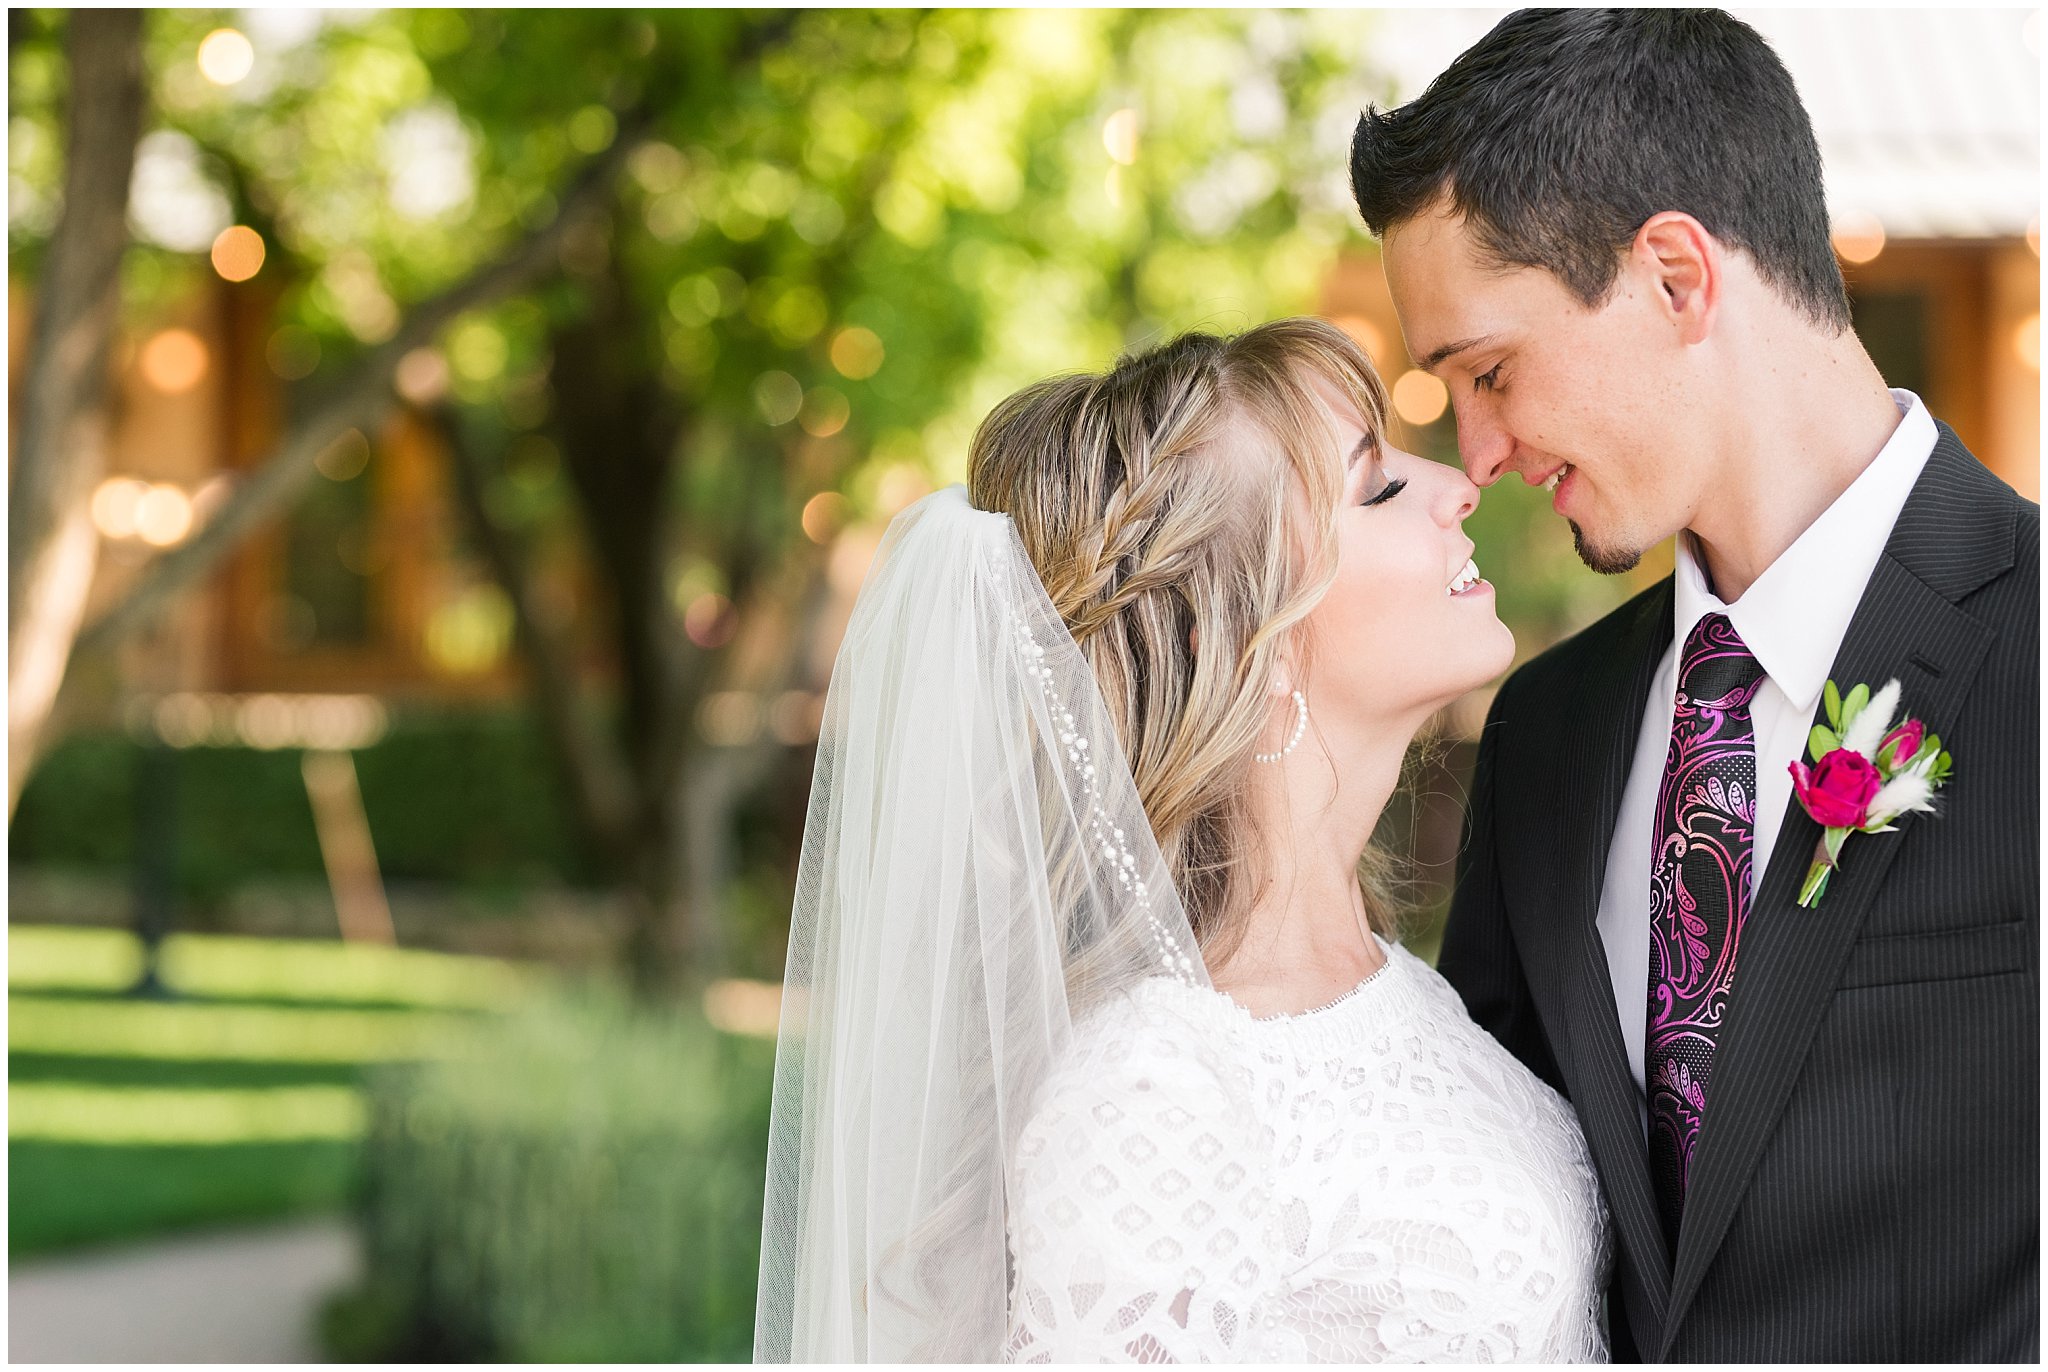 Bride and groom portraits candid moments | white and deep pink florals with black suit and lace dress | Wadley Farms Summer Wedding | Jessie and Dallin Photography